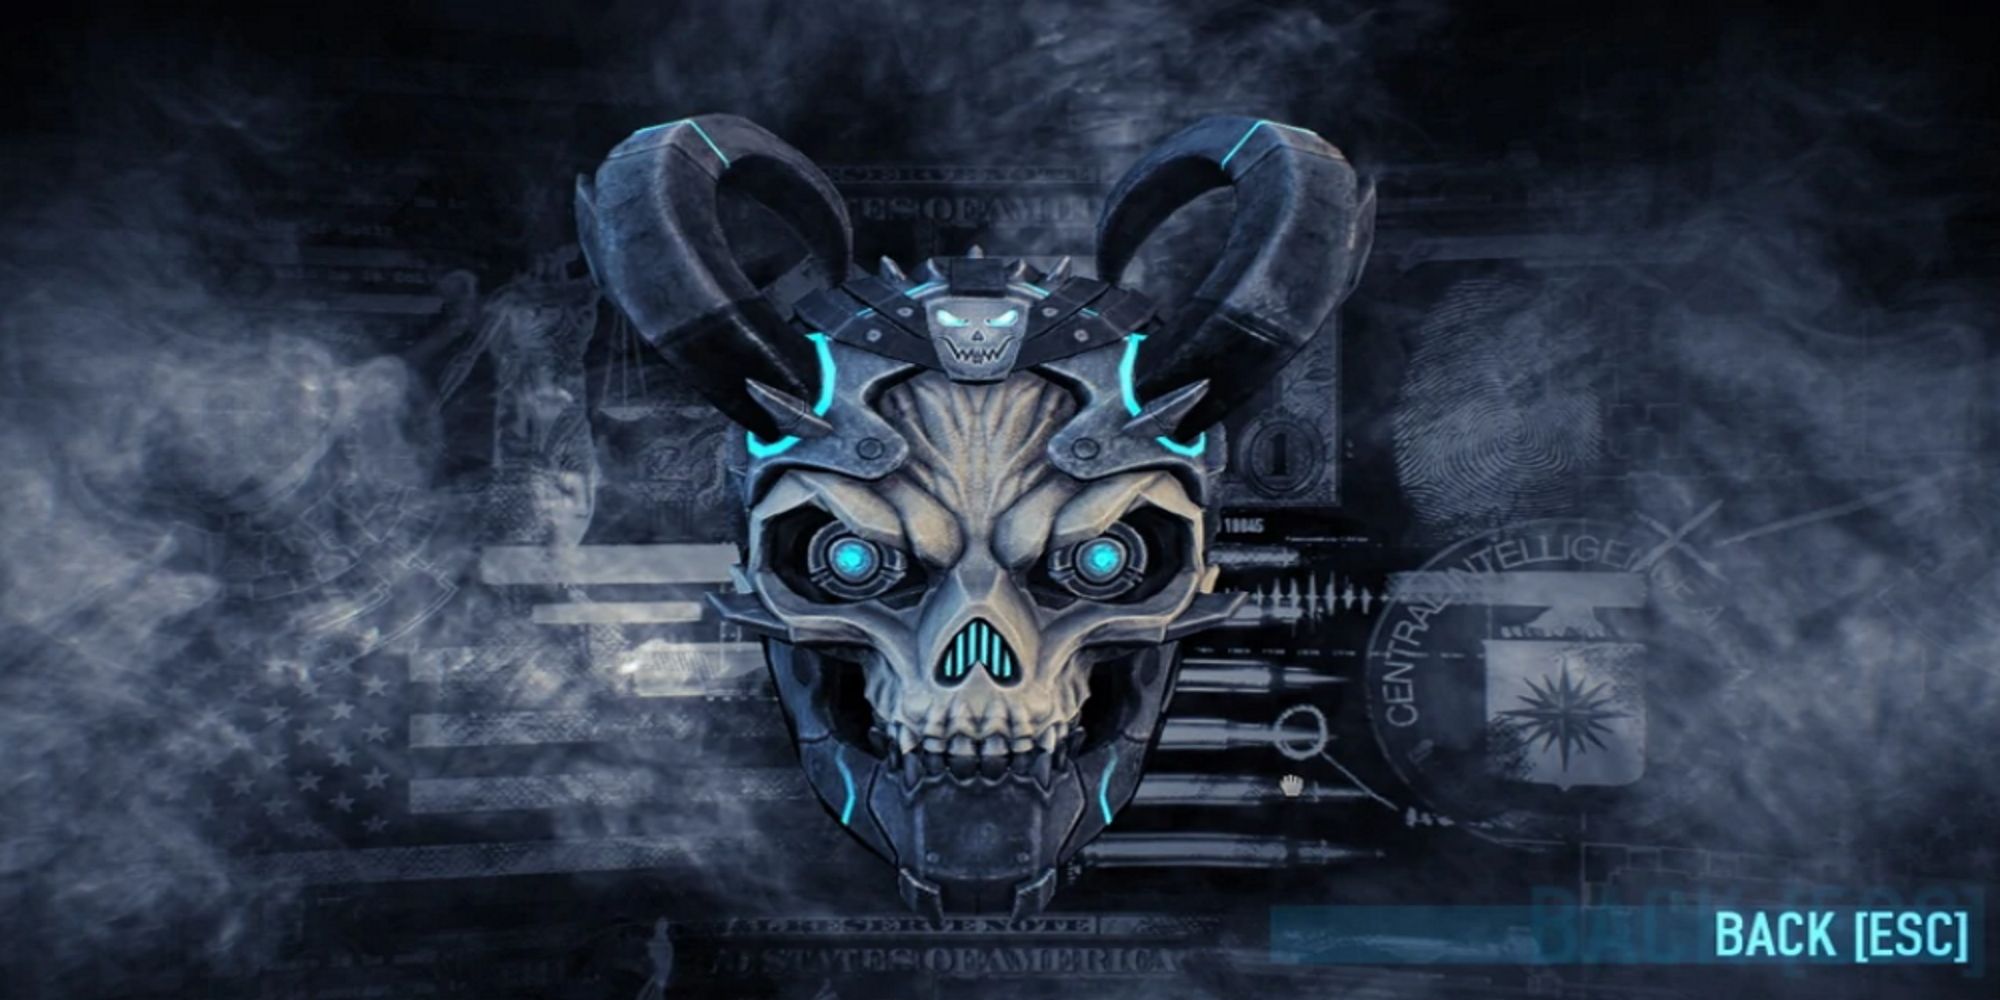  Mega Death Wish mask from PAYDAY 2